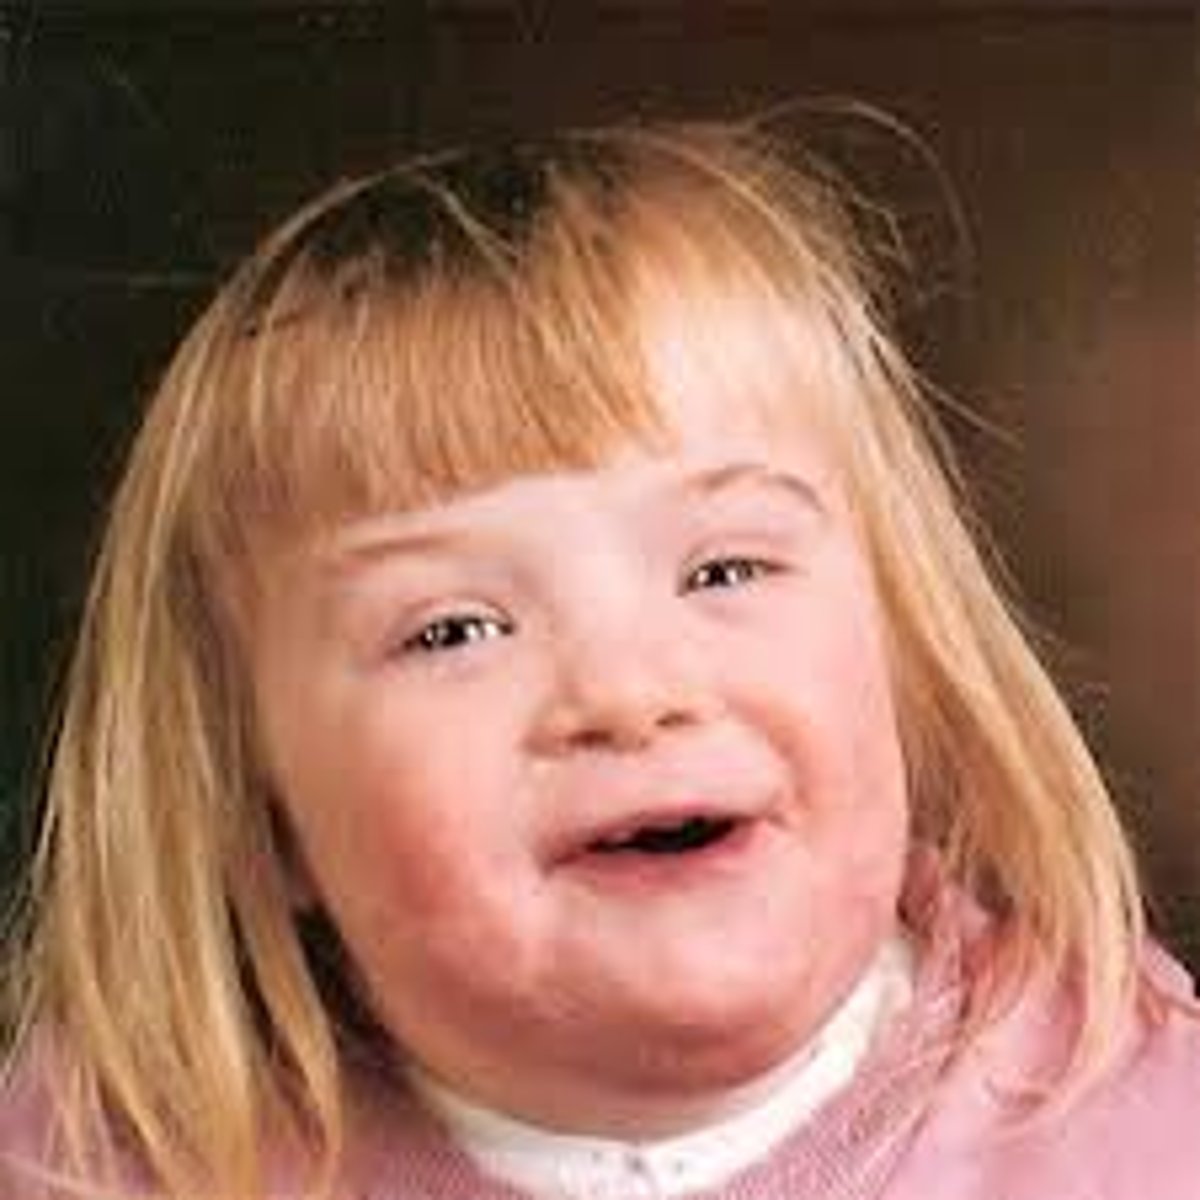 <p>a human genetic disease resulting from having an extra chromosome 21 (characterized by having a delay in mental development).</p>